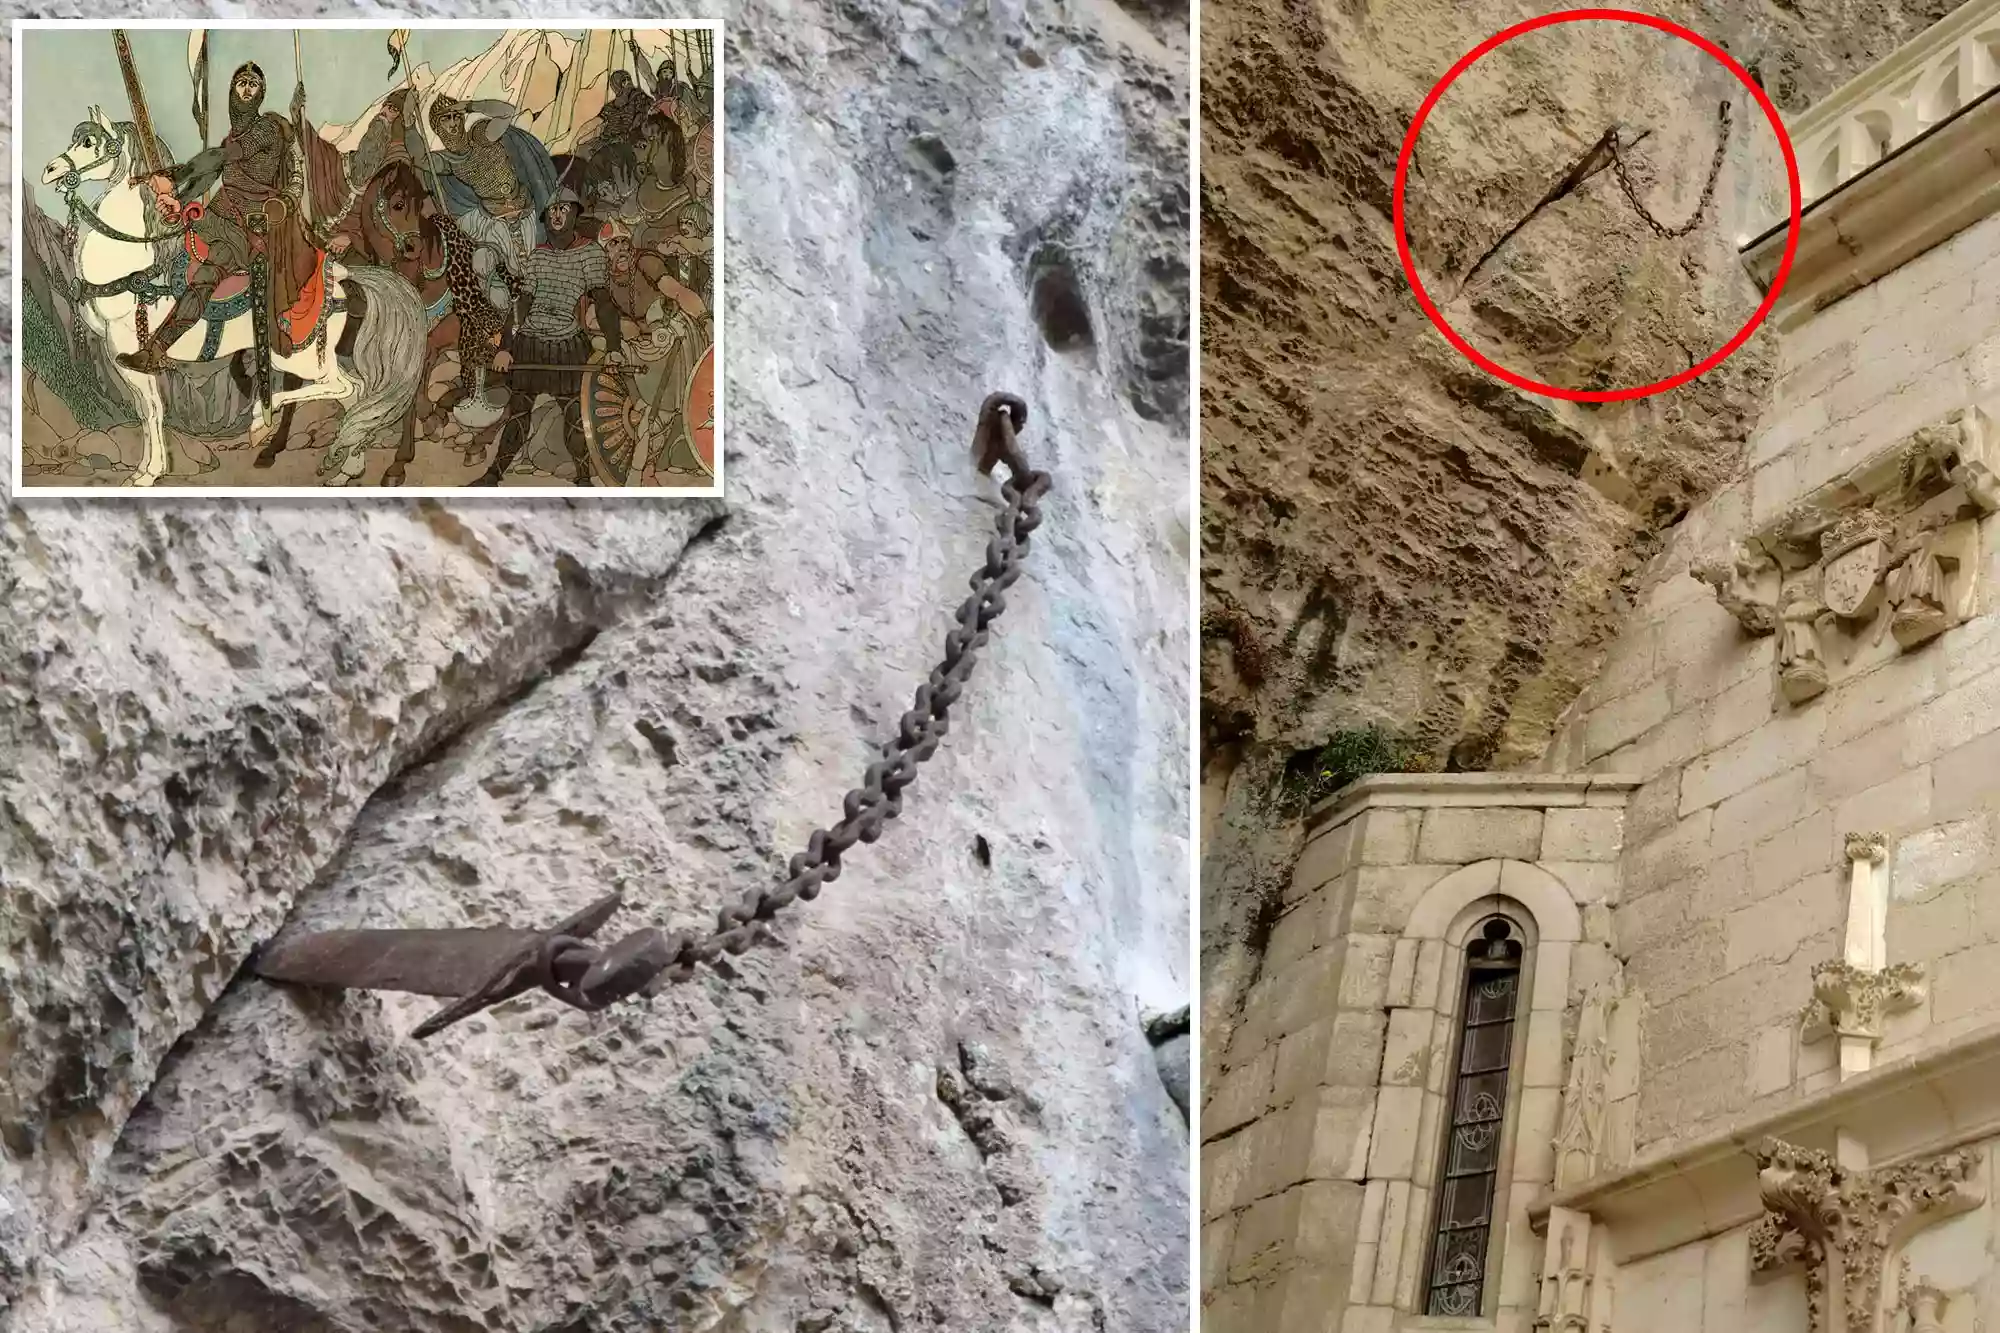 Legendary 'Excalibur' sword embedded in rock for 1,300 years vanishes mysteriously in France